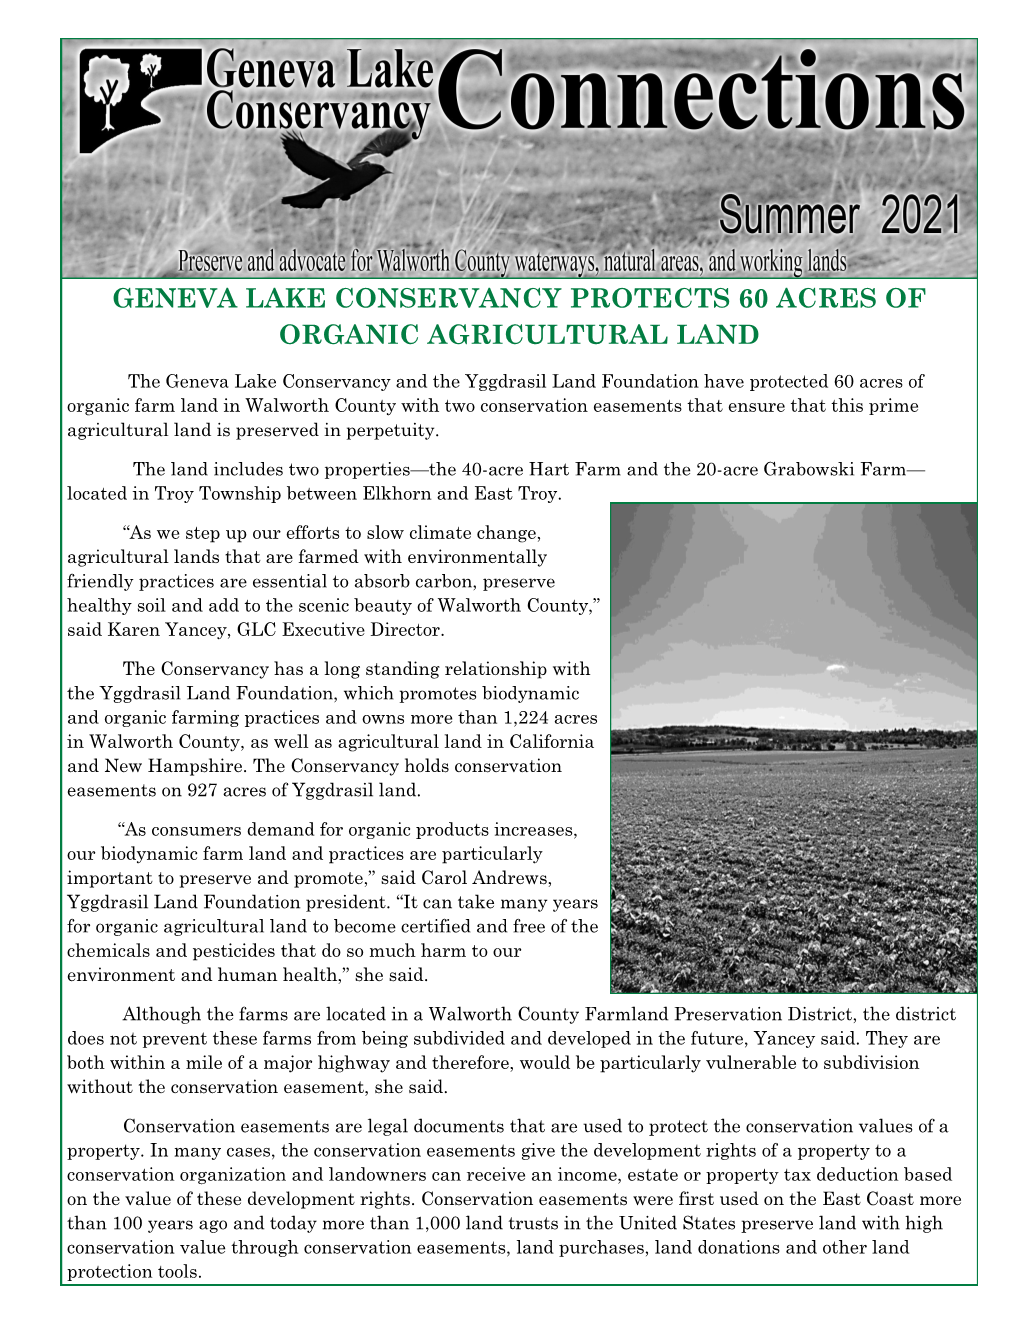 Geneva Lake Conservancy Protects 60 Acres of Organic Agricultural Land